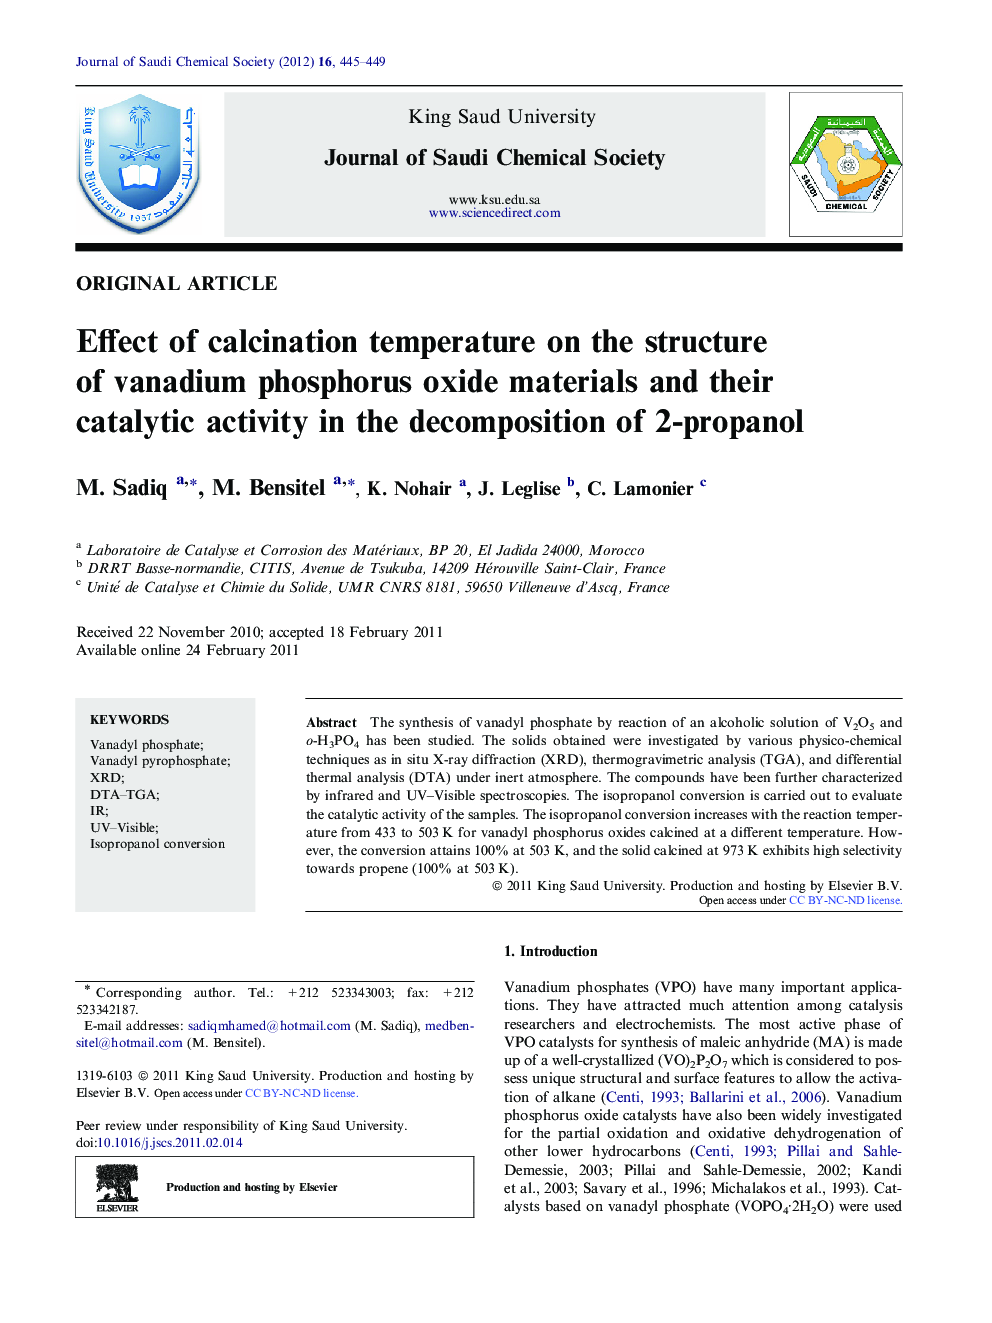 Effect of calcination temperature on the structure of vanadium phosphorus oxide materials and their catalytic activity in the decomposition of 2-propanol 